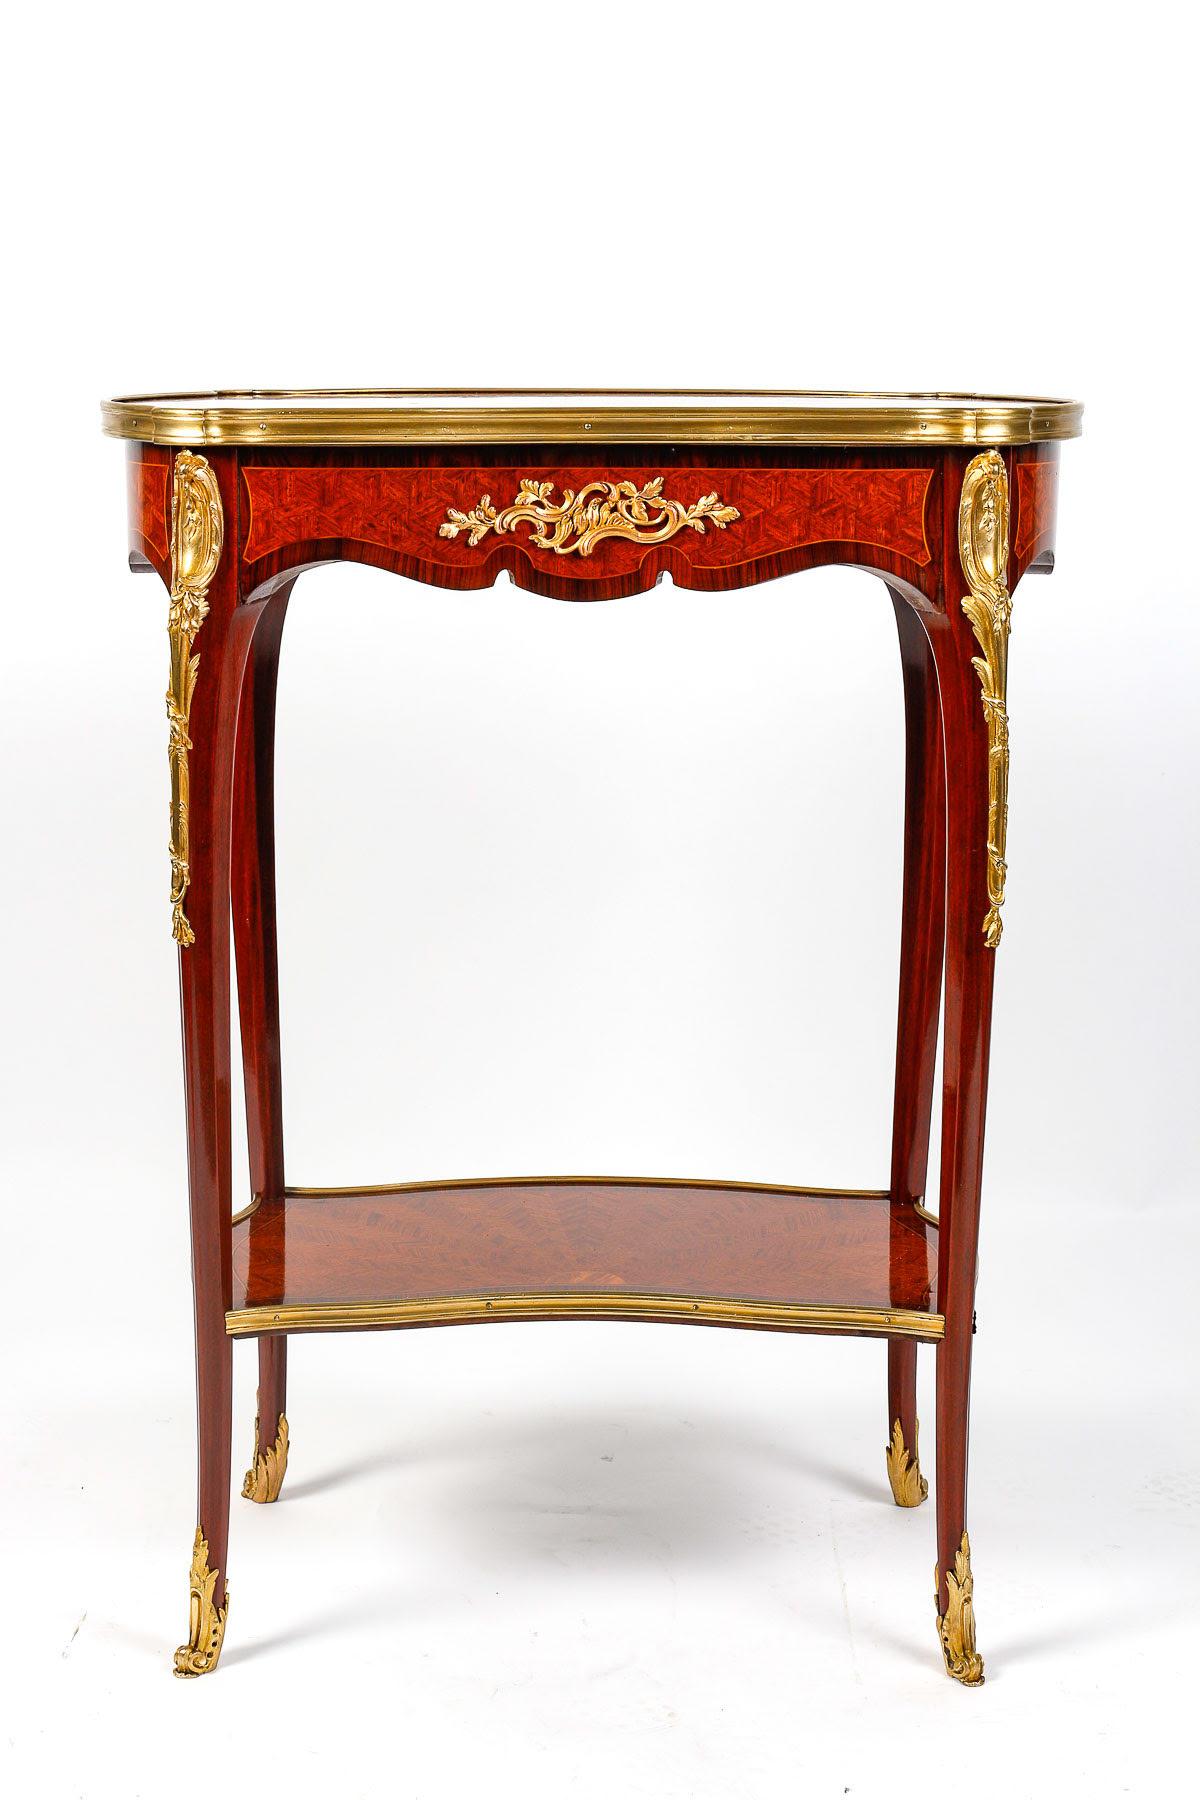 Small side table, end of sofa, Louis XV style, 19th century.

Small side table, end of sofa in marquetry and gilt bronze in the Louis XV style, Napoleon III period.    

h: 73cm , w: 56cm, d: 36cm